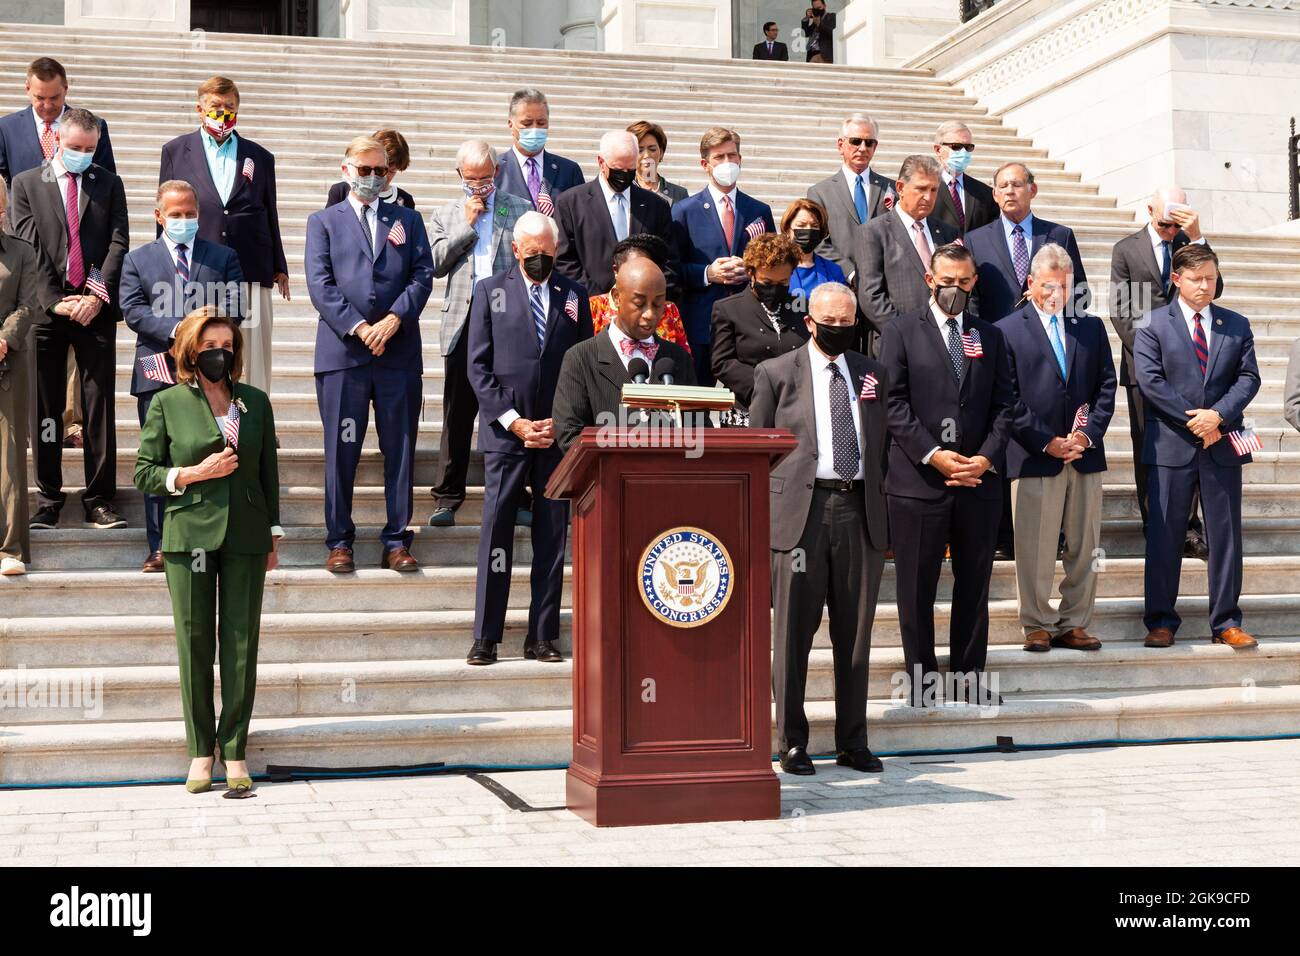 Washington DC, USA. 13th Sep 2021. Members of Congress bow their heads in prayer during a ceremony on the Capitol steps in remembrance of the victims of the September 11th attacks. Credit: Allison Bailey/Alamy Live News Stock Photo